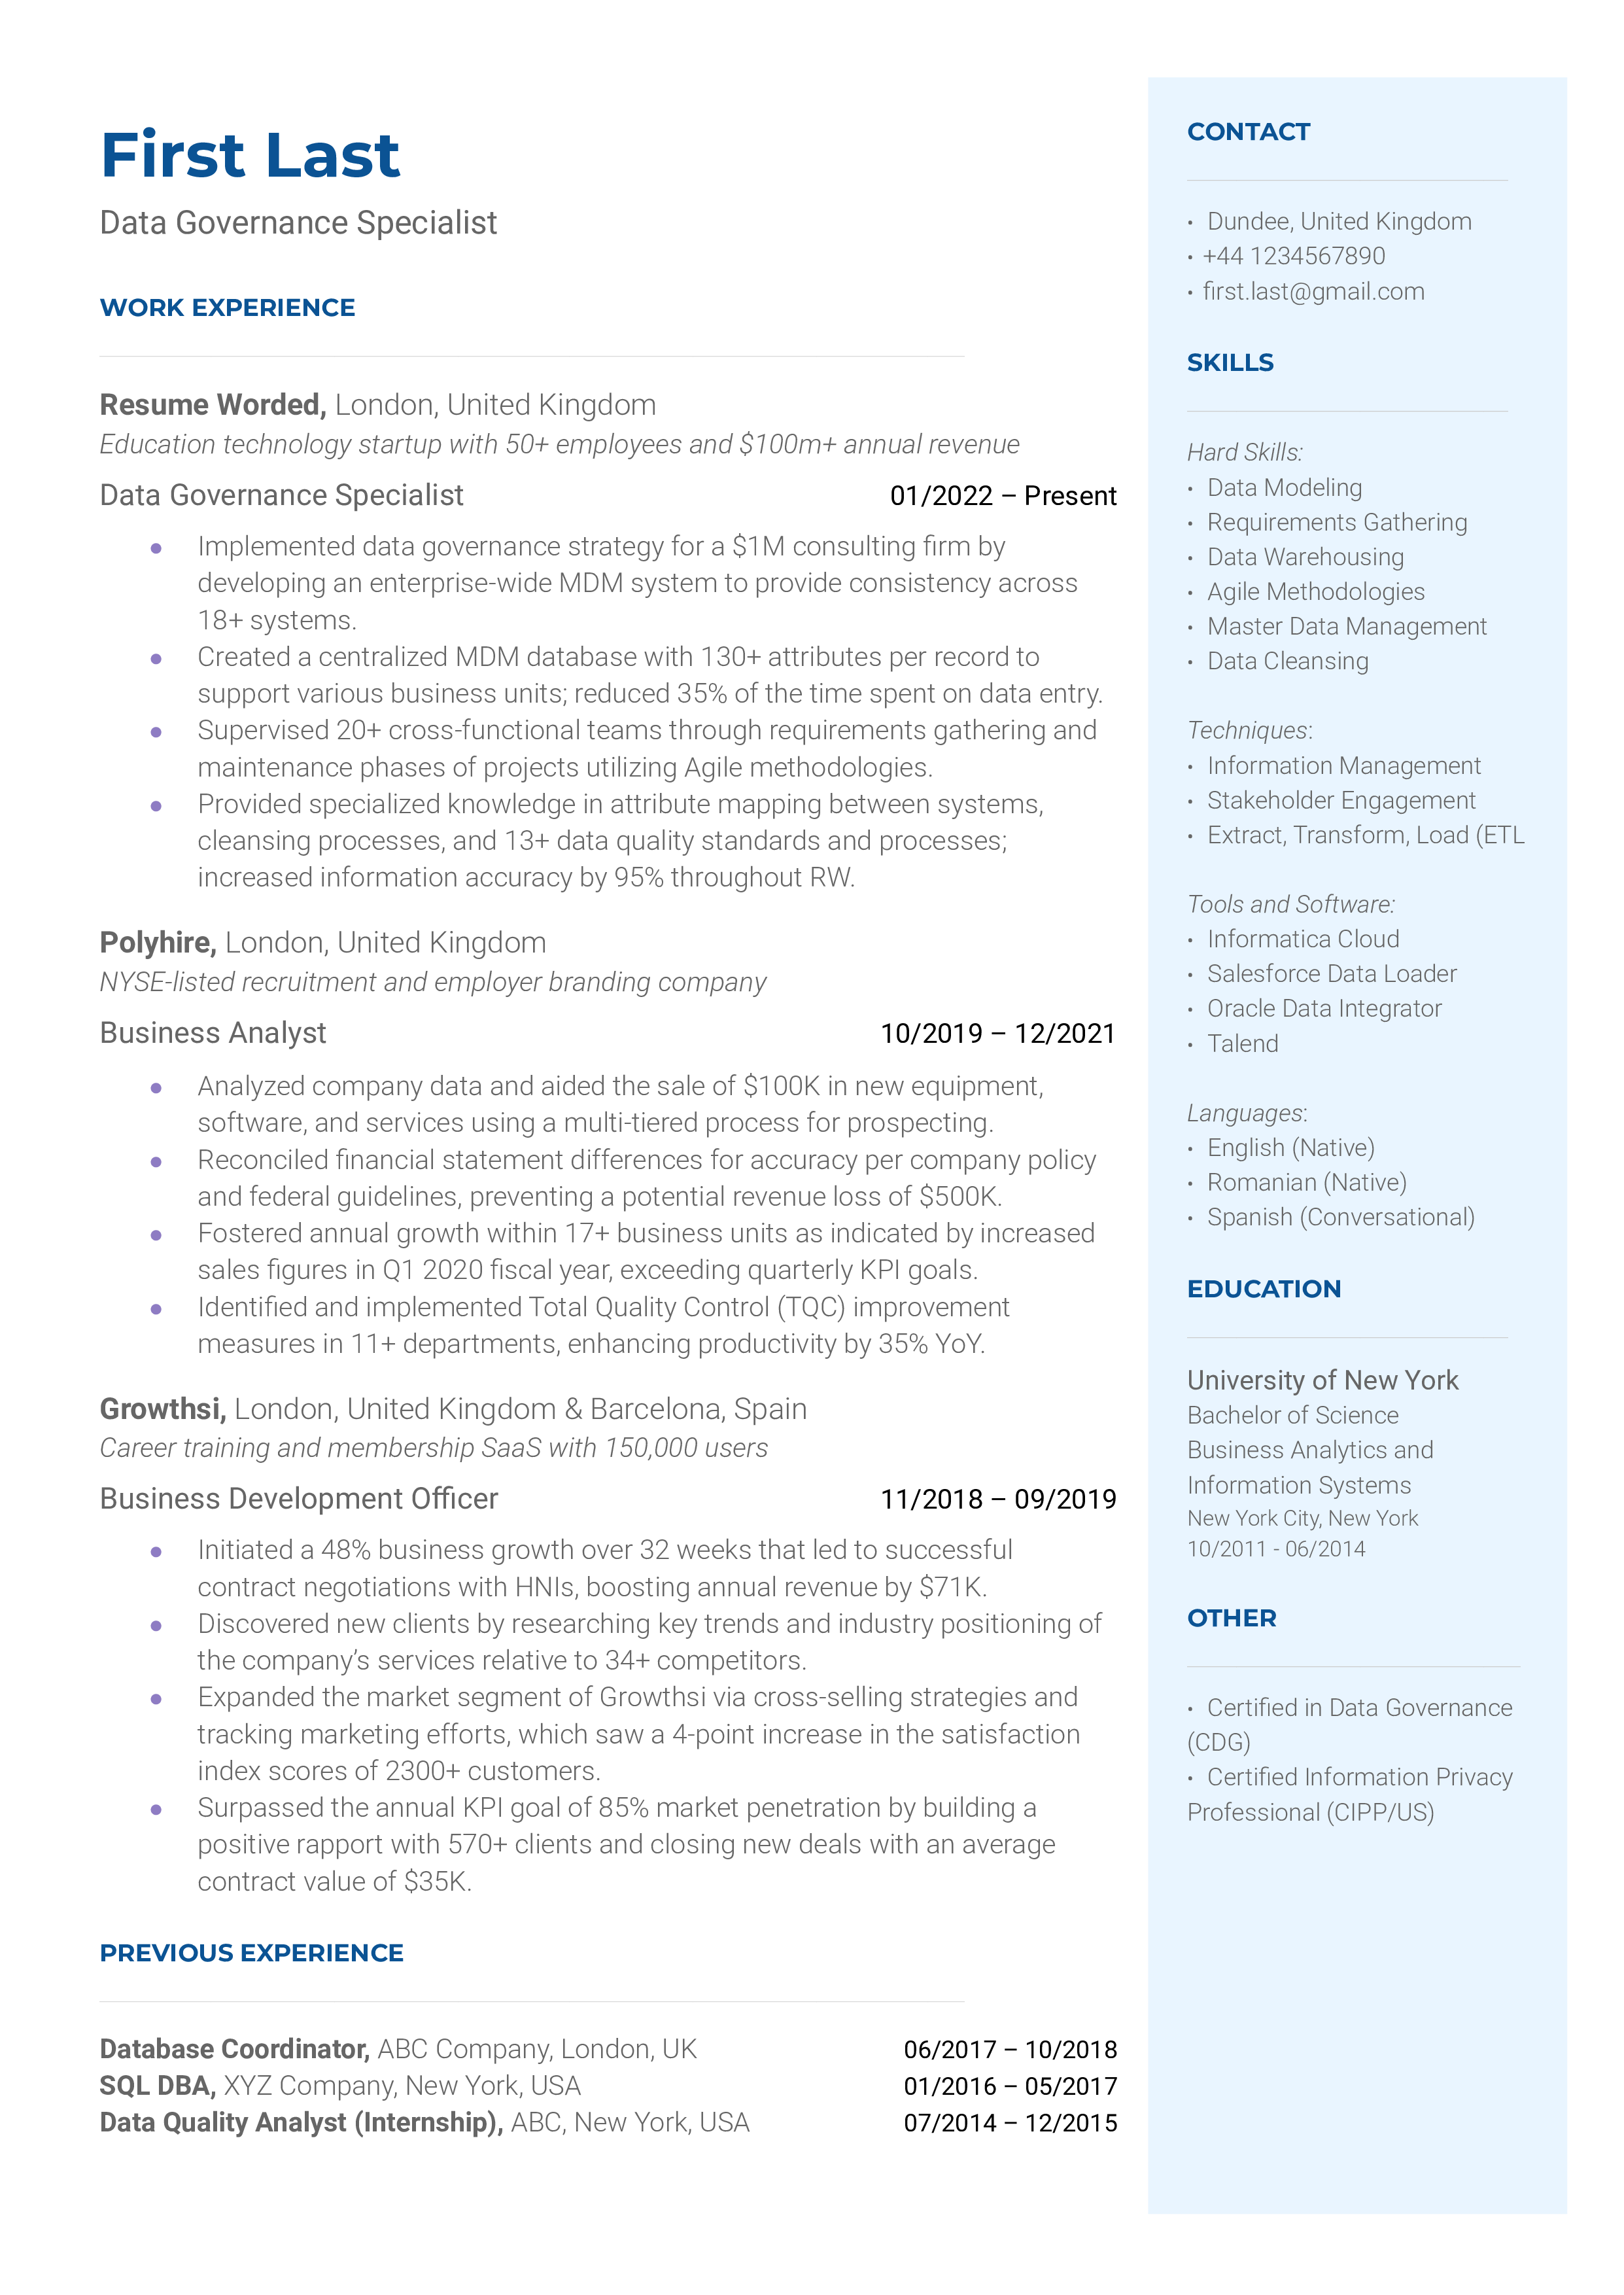 A CV for a Data Governance Specialist showcasing regulatory knowledge and technical skills.